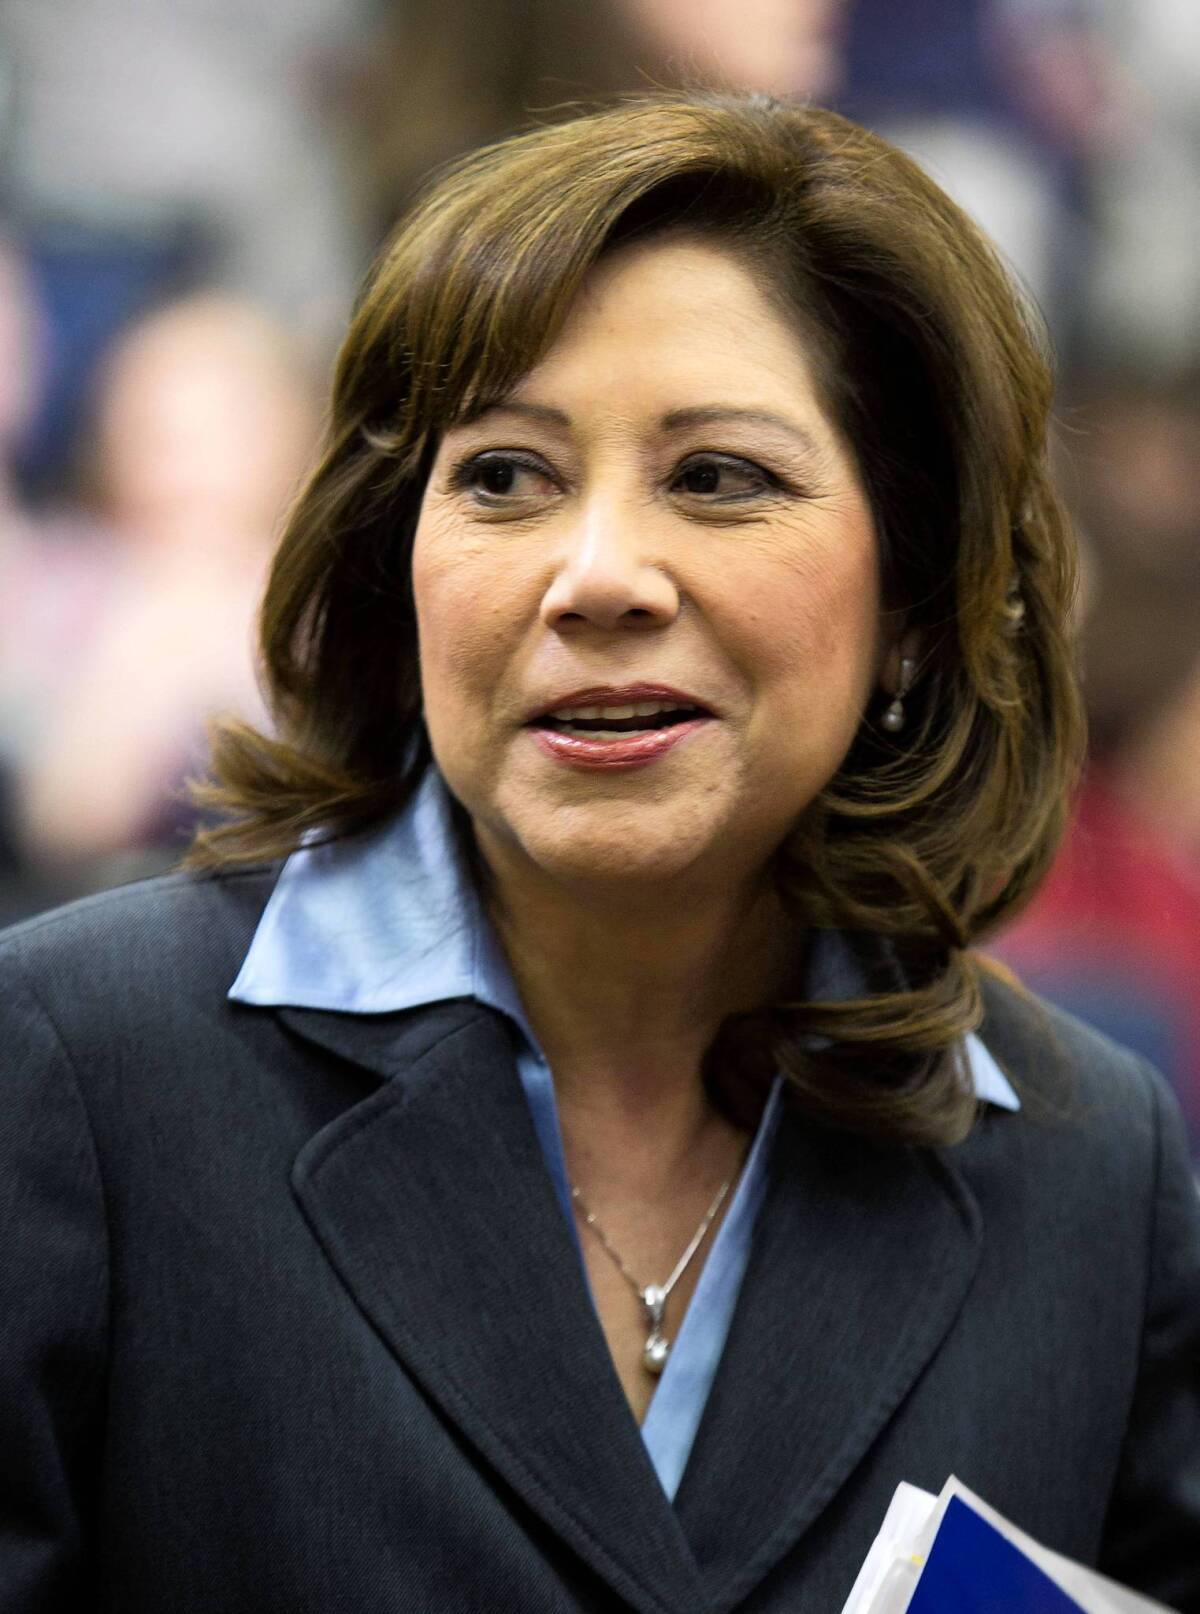 Lawsuits filed by members of the International Union of Operating Engineers allege that complaints they brought to the Department of Labor -- including those during Hilda Solis' tenure -- were not properly investigated.